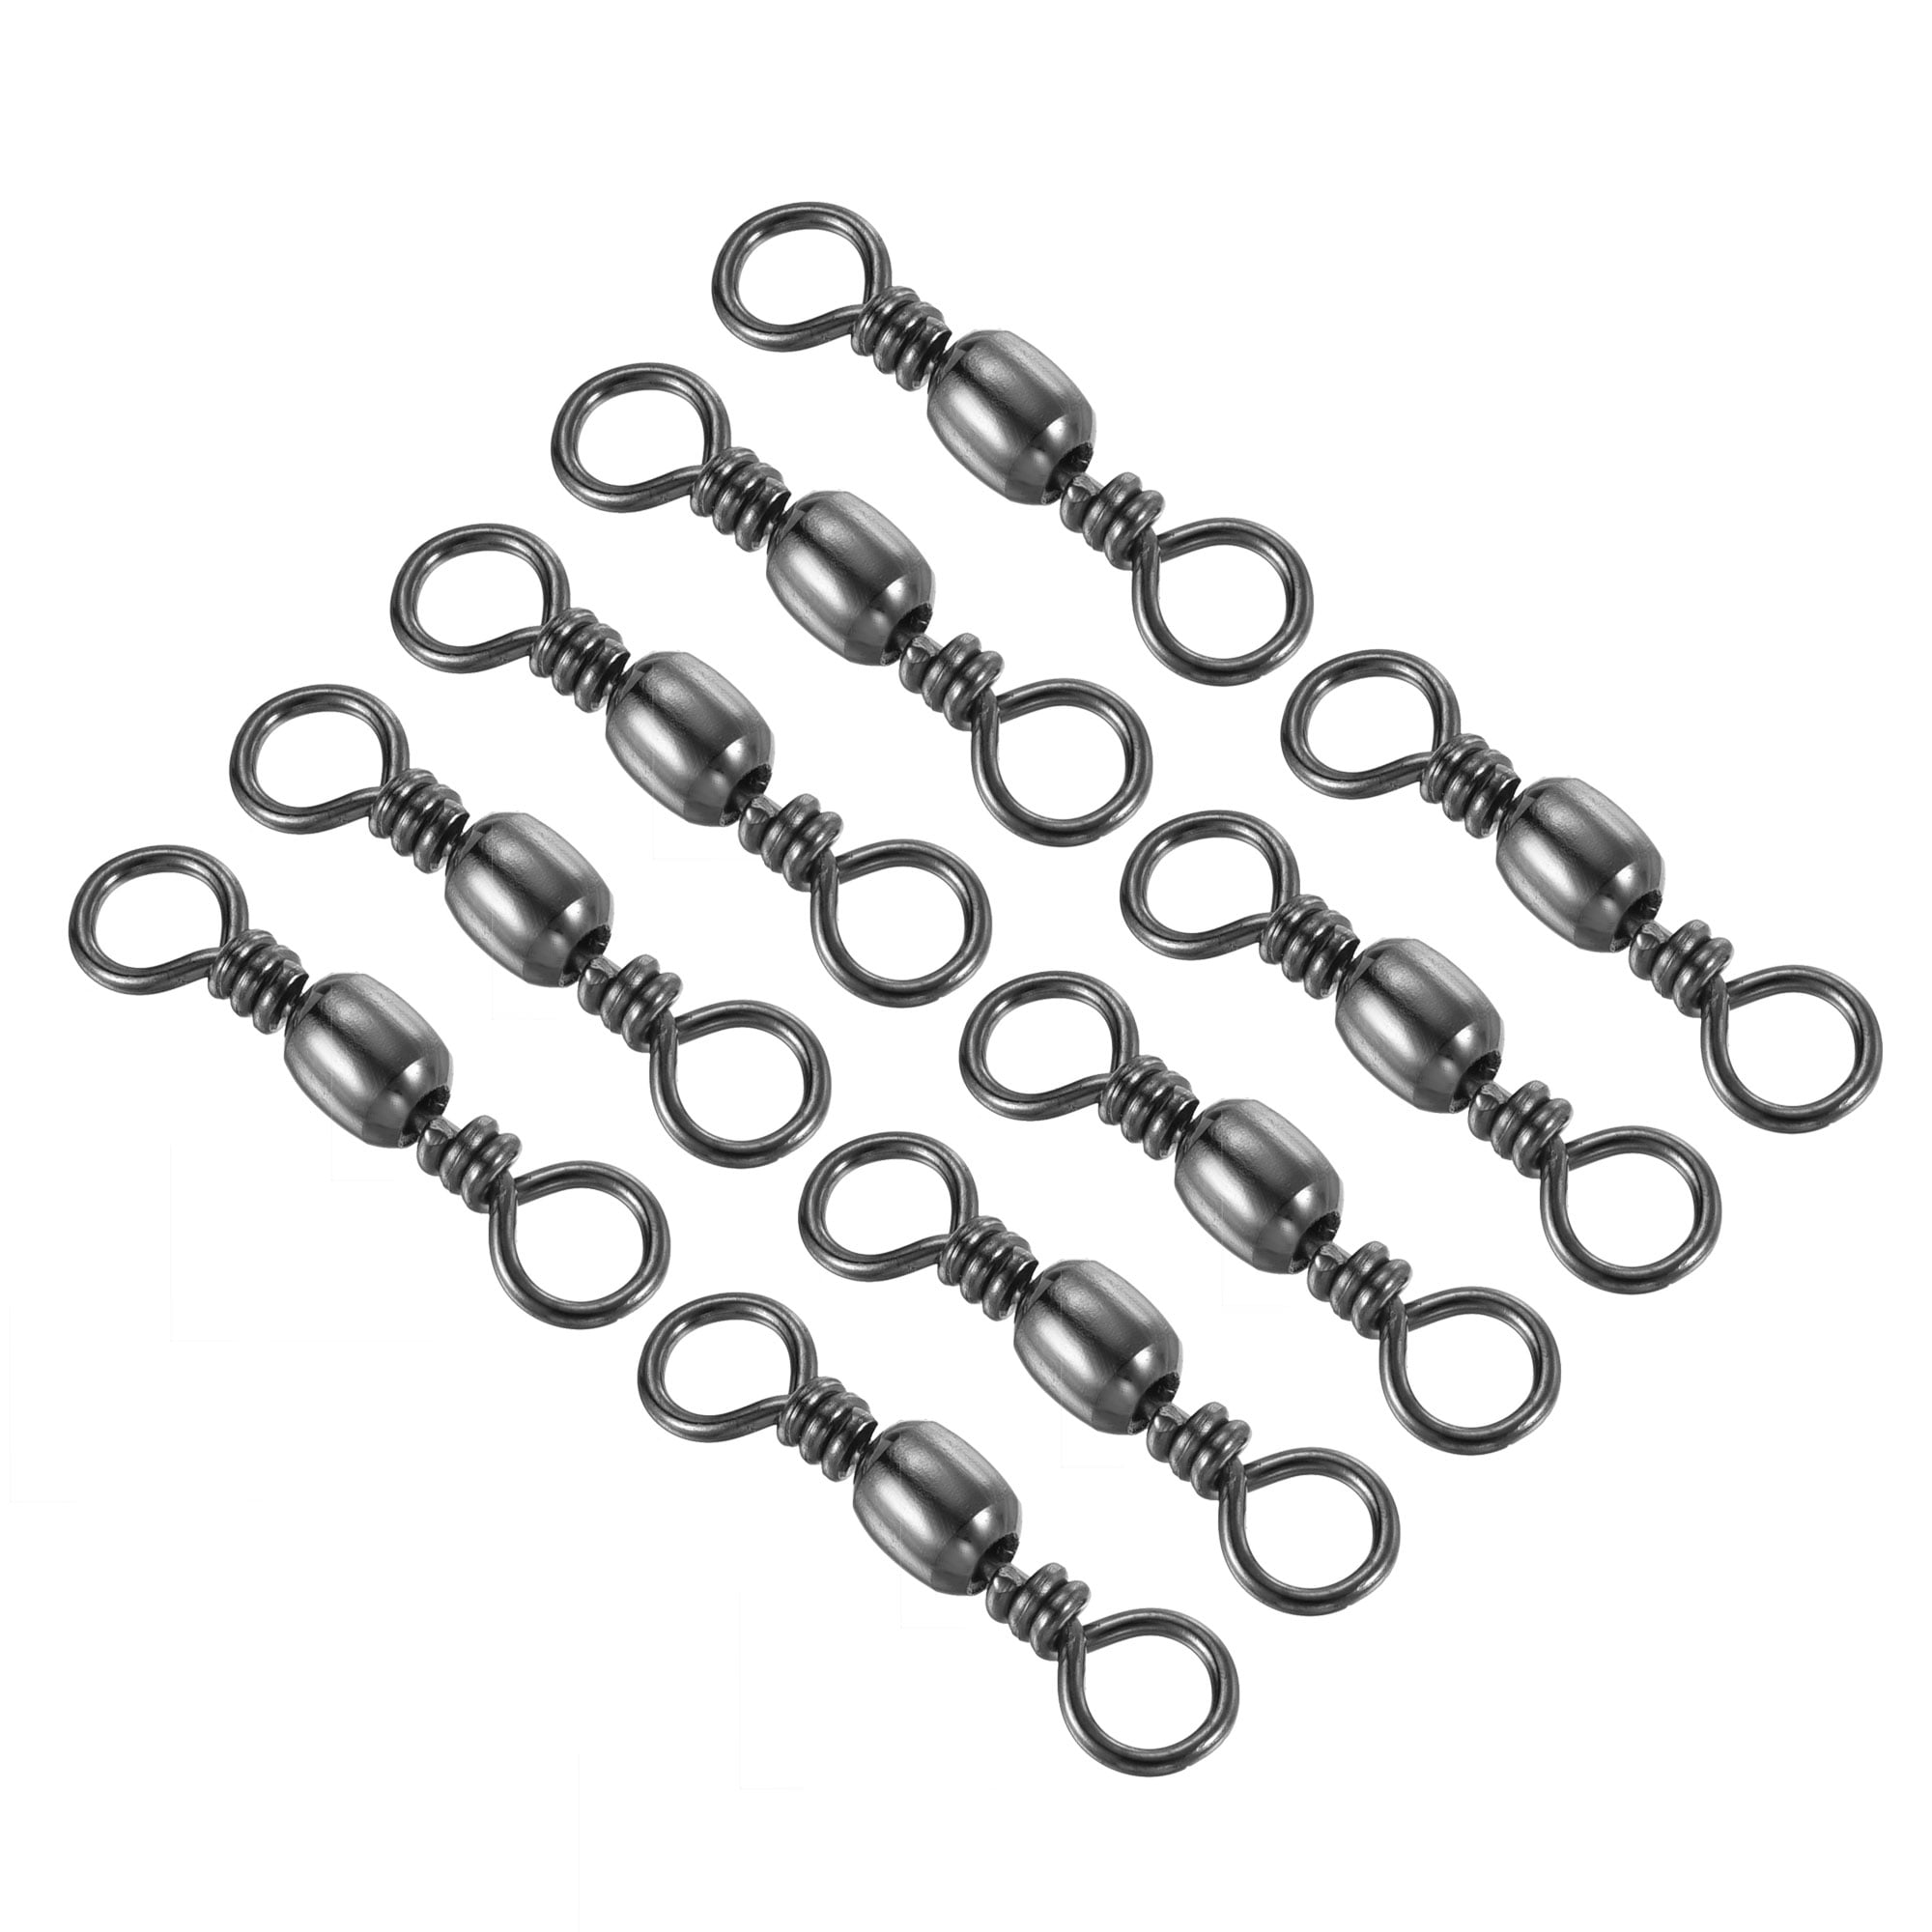 Uxcell 99lbs Stainless Steel Fishing Barrel Swivels, Black 50 Pack